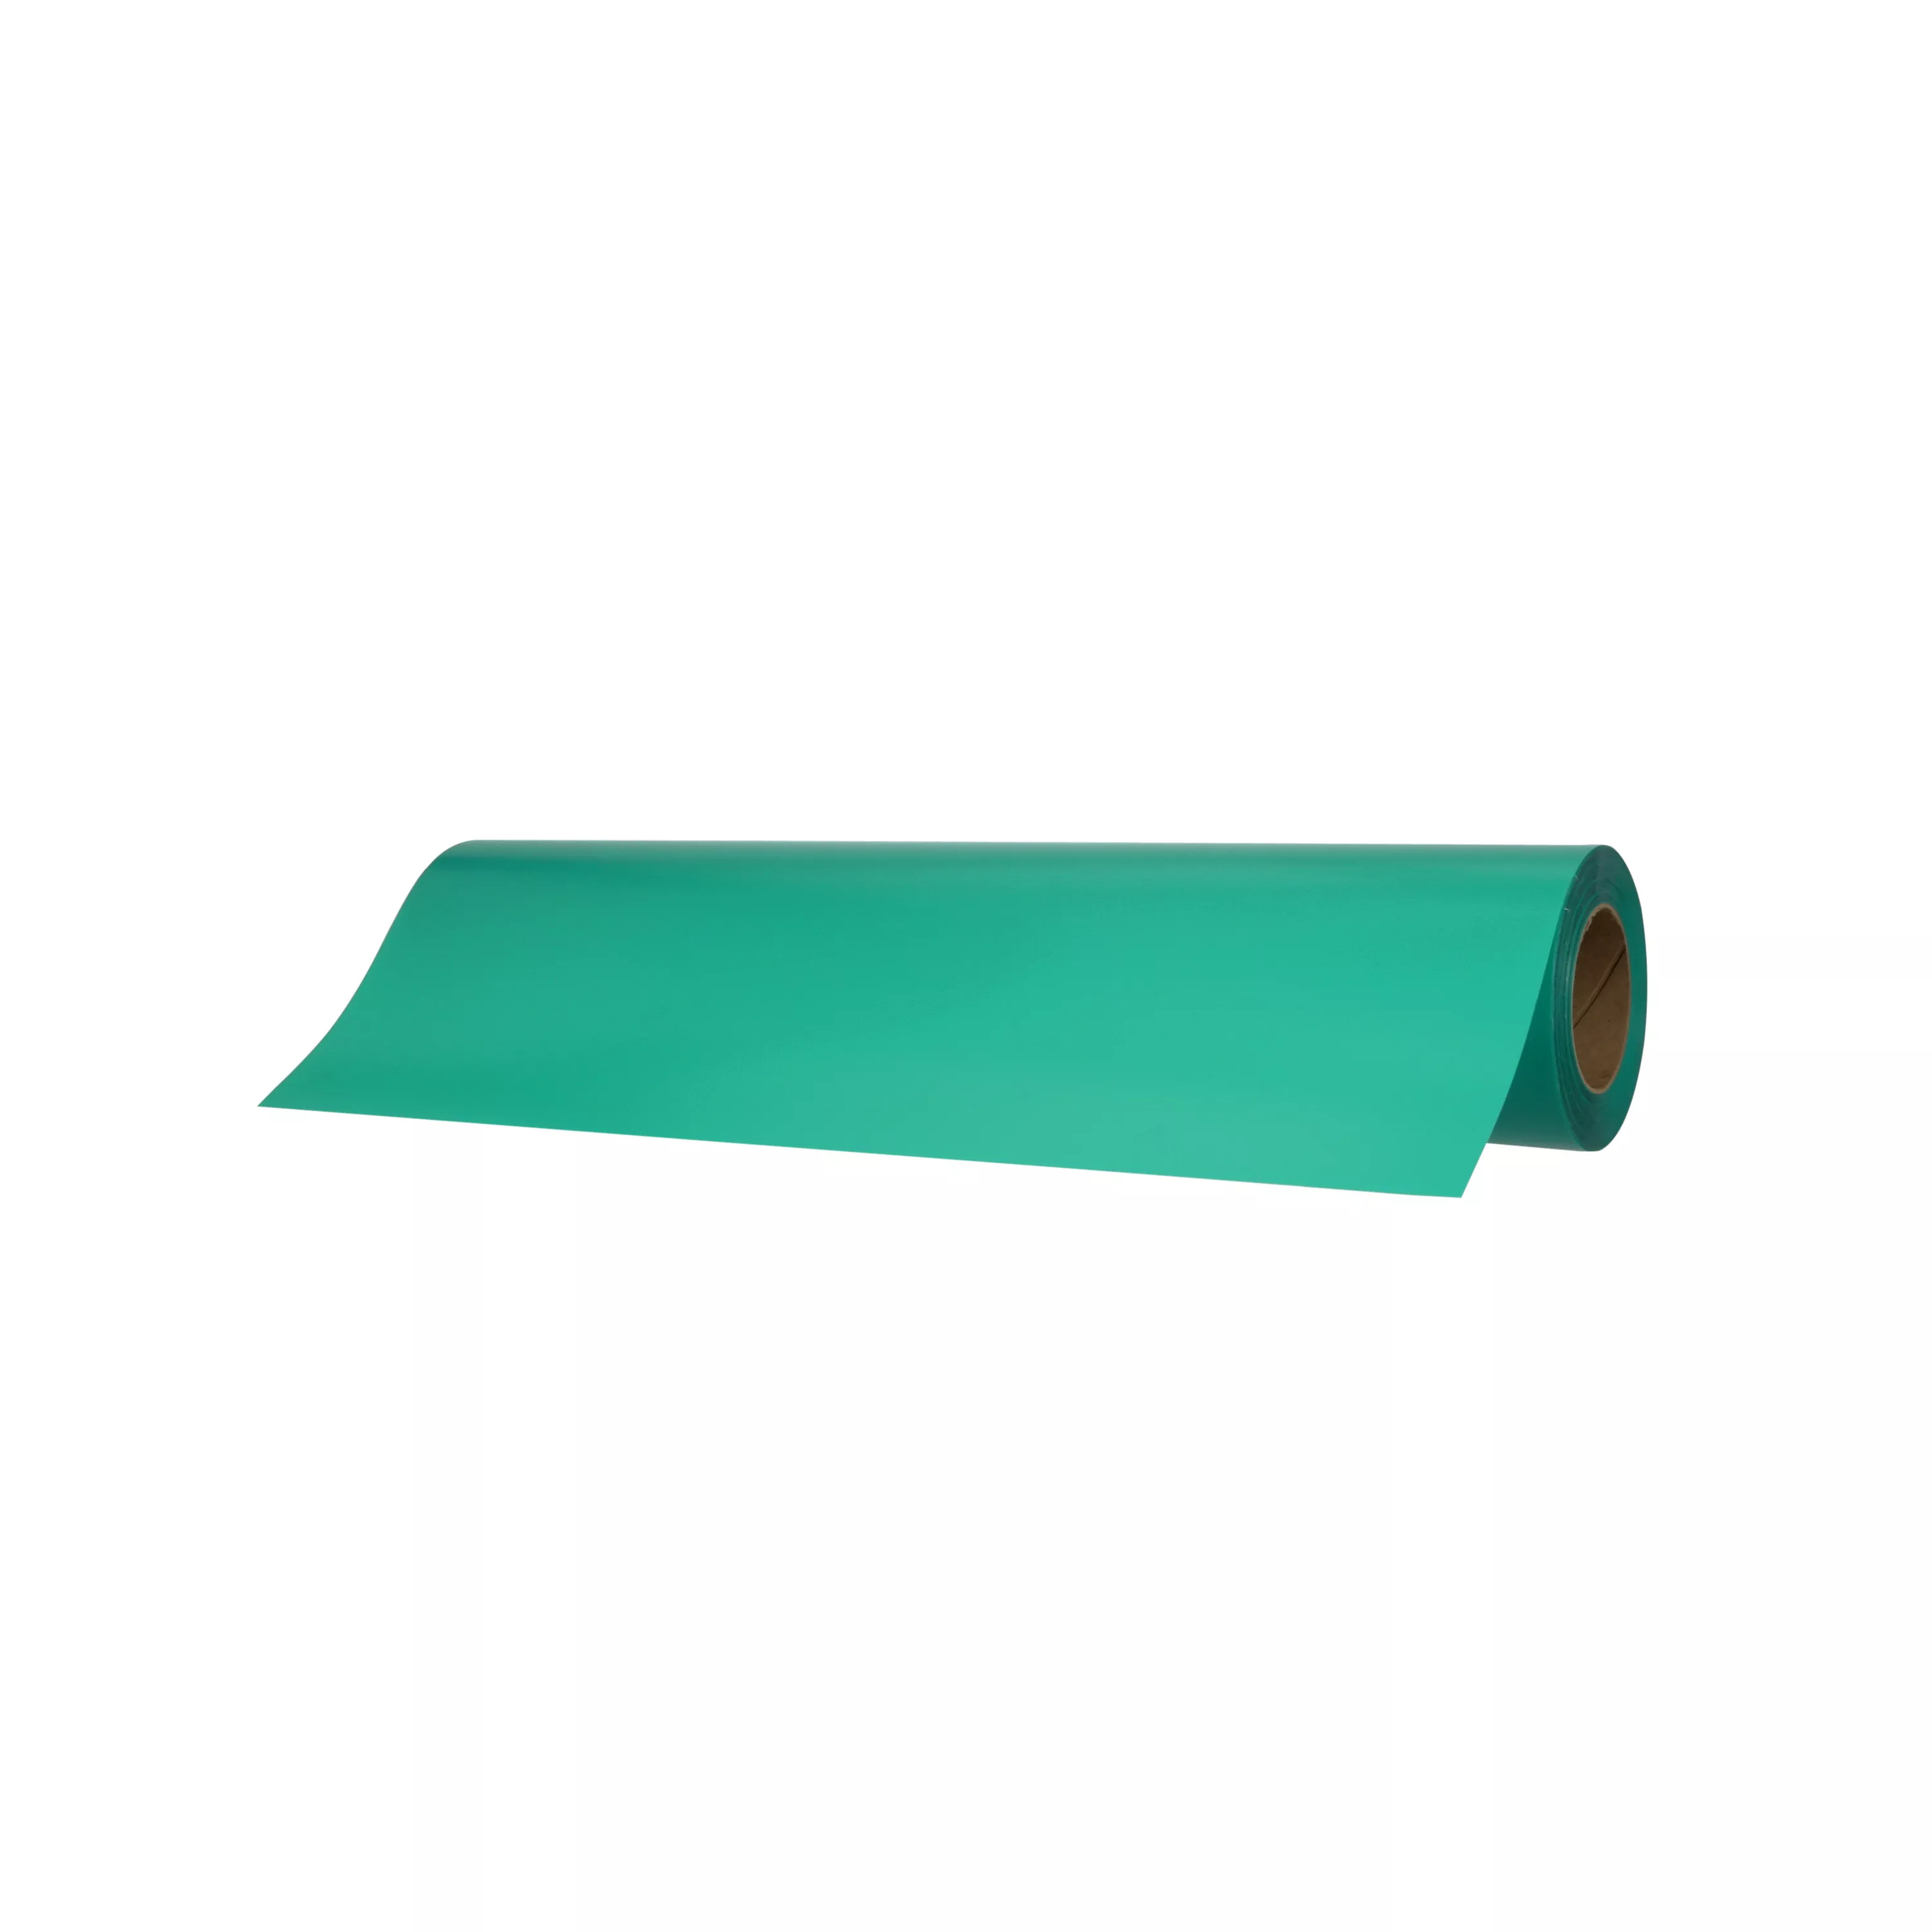 3M™ Scotchcal™ Translucent Graphic Film 3630-86, Blue Lagoon, 48 in x 50
yd, 1 Roll/Case